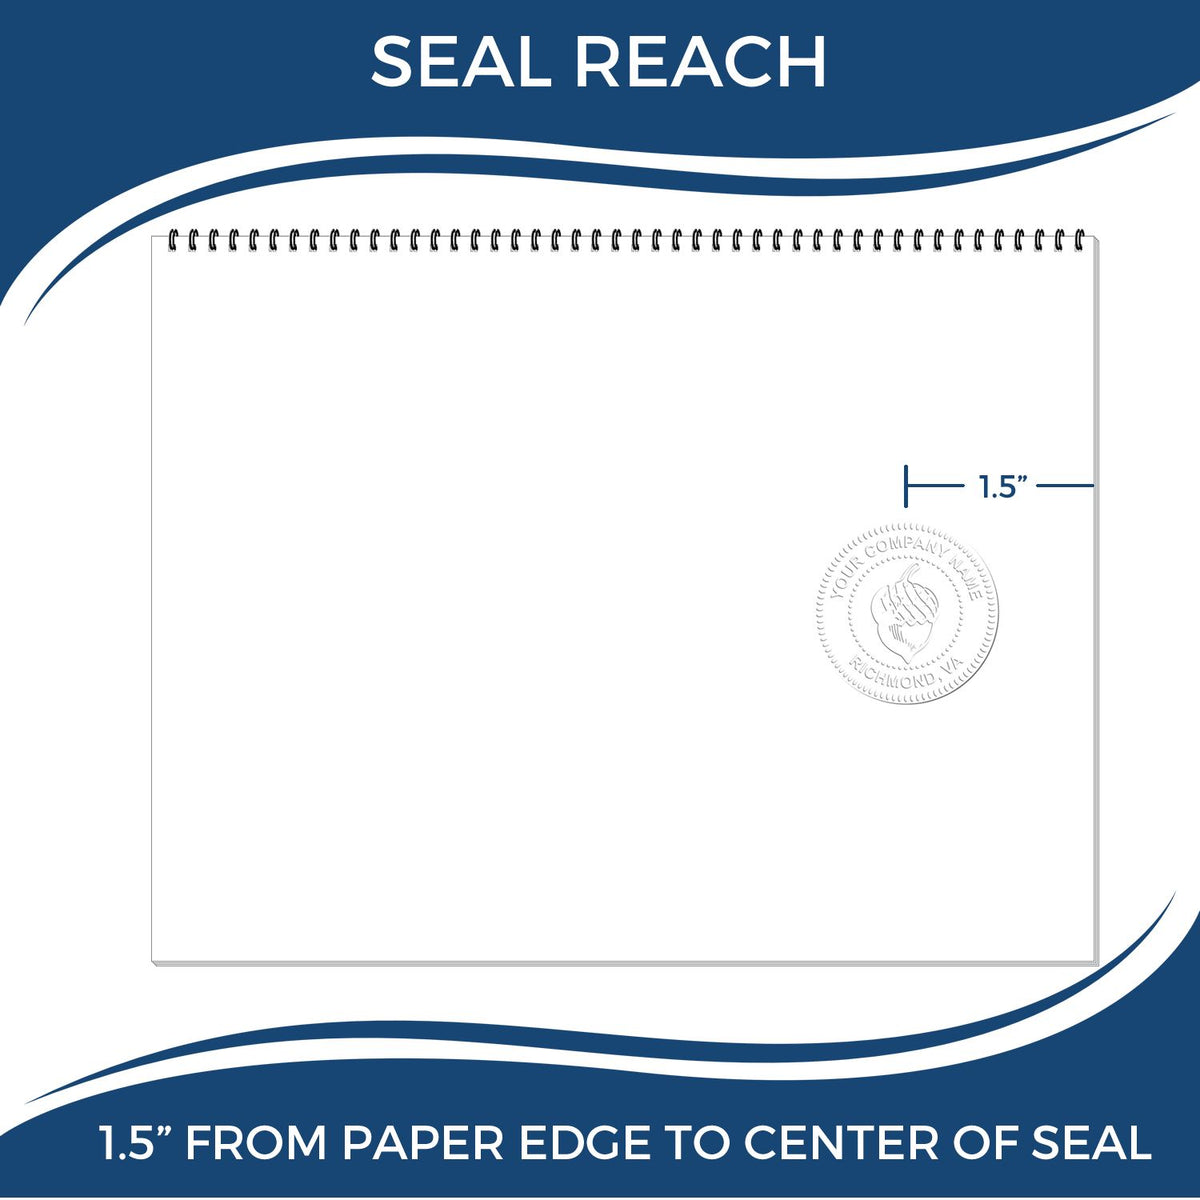 An infographic showing the seal reach which is represented by a ruler and a miniature seal image of the Hybrid Arizona Land Surveyor Seal